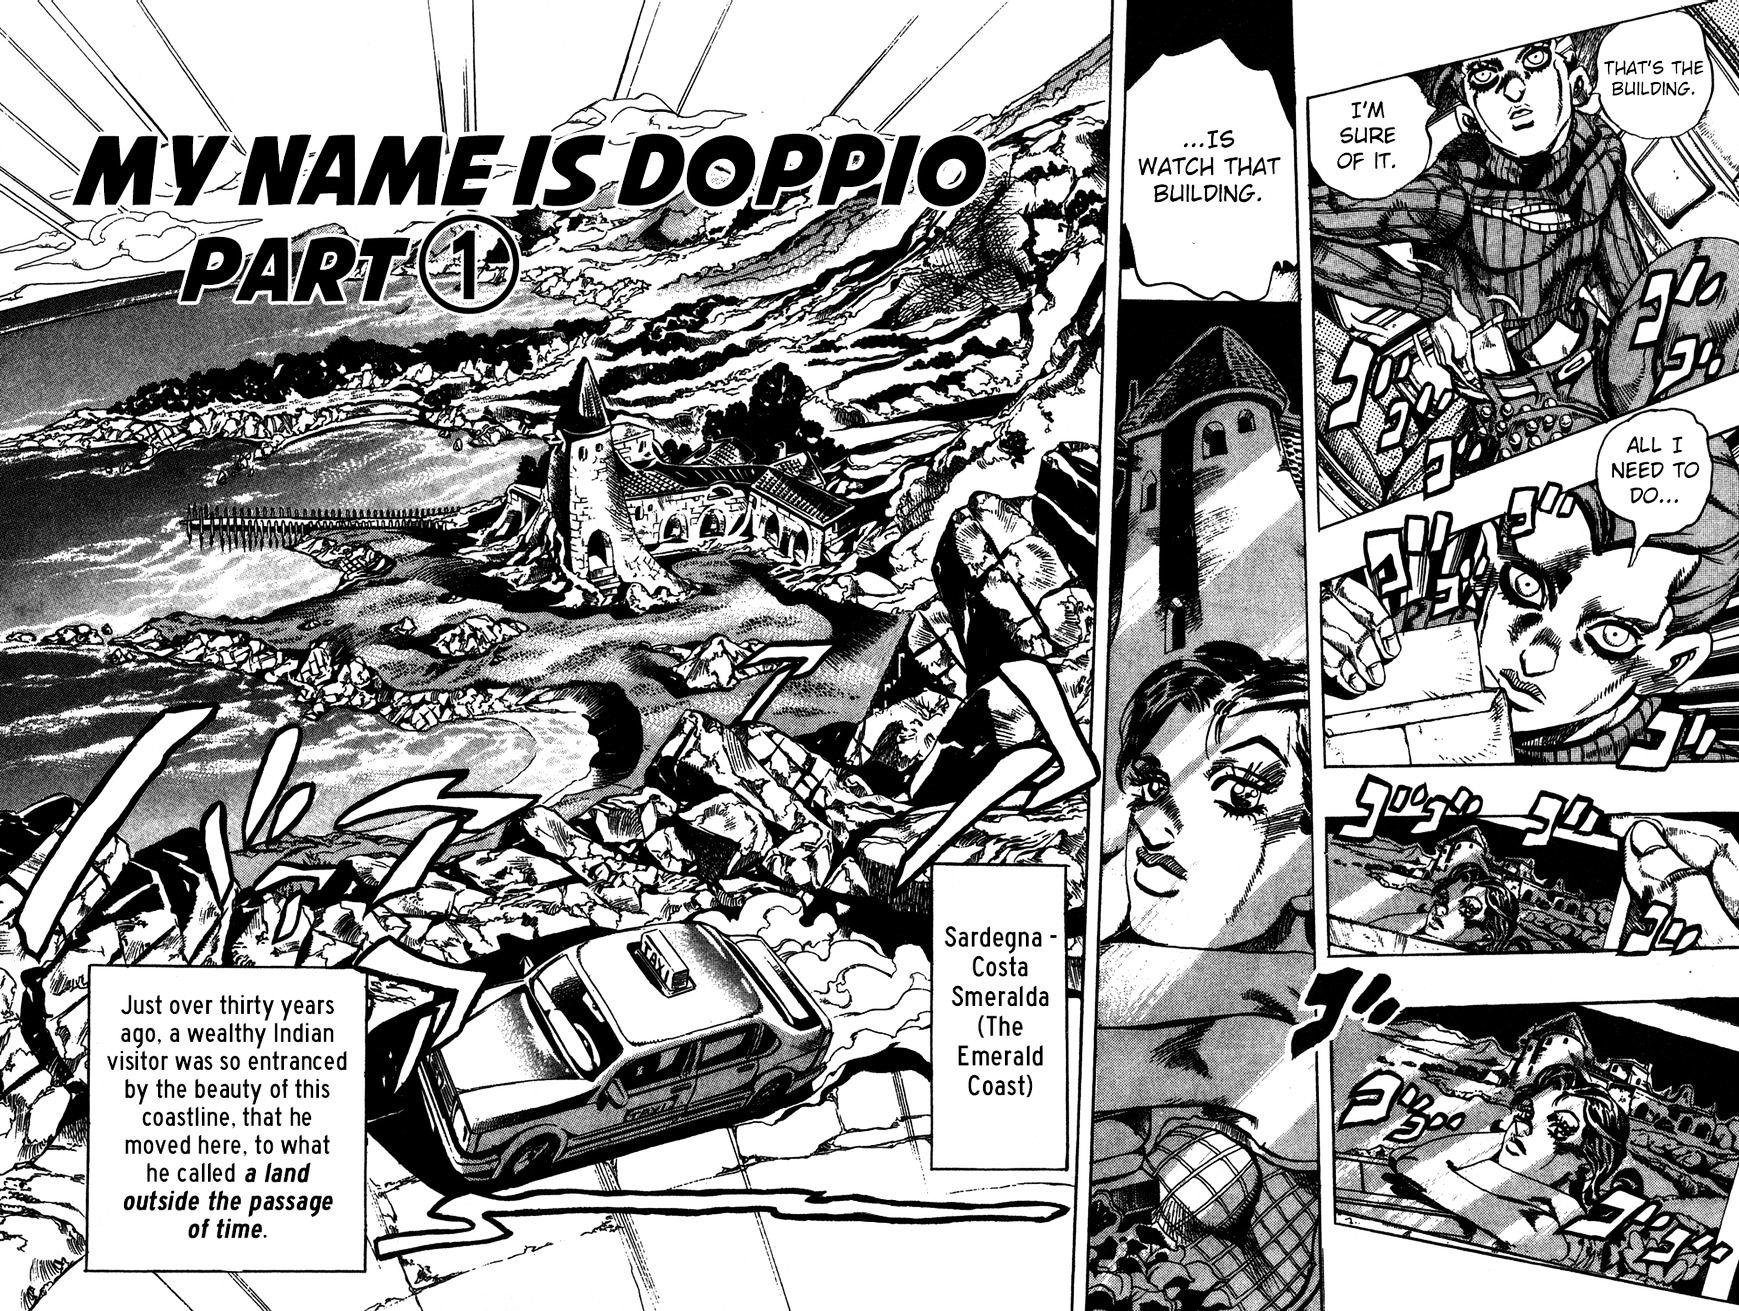 Jojo's Bizarre Adventure Vol.66 Chapter 542 : My Name Is Doppio - Part 1 (Official Color Scans) page 3 - 